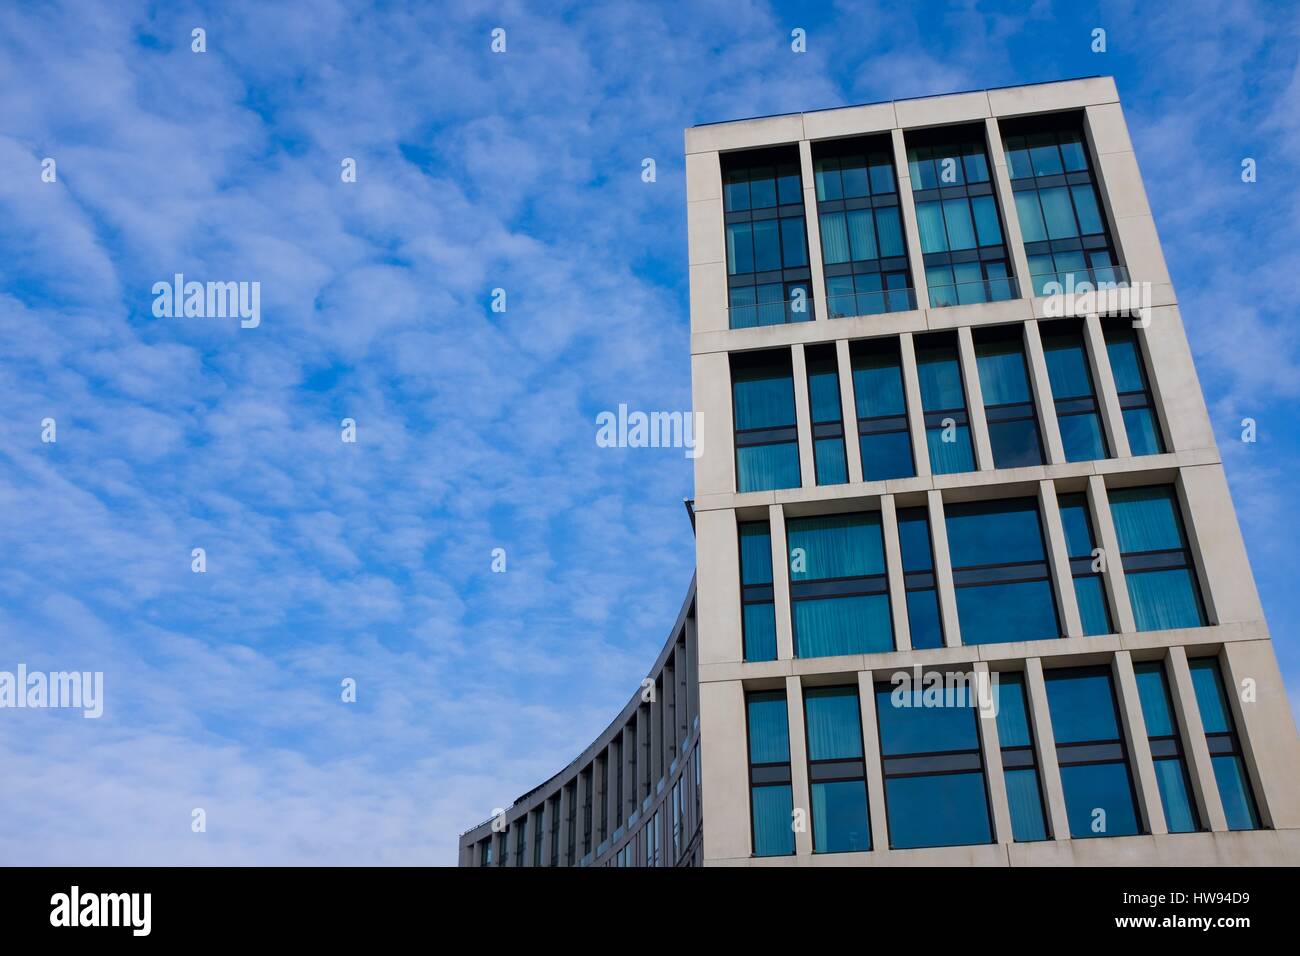 Blue rectangular windows in modern building in Liverpool contrasted against wispy cloud in blue sky Stock Photo